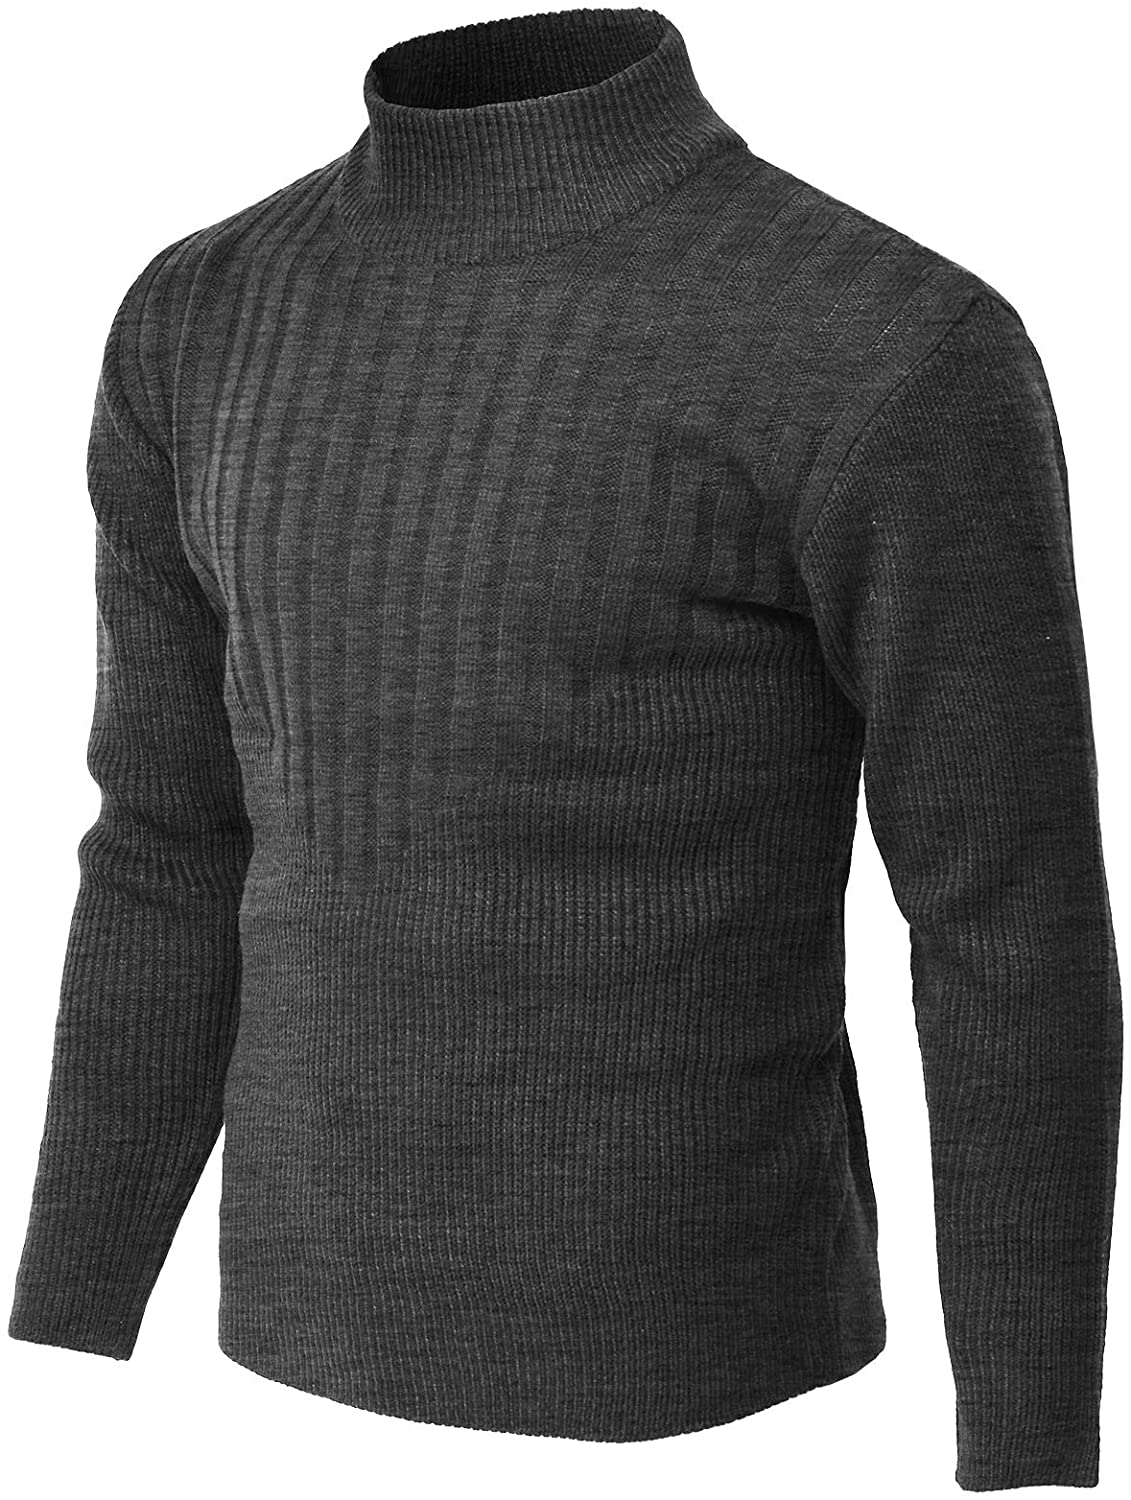 be-my-guest Winter Mens O-Neck Sweater Slim Fit Solid Color Knitted Long-Sleeved Pullovers